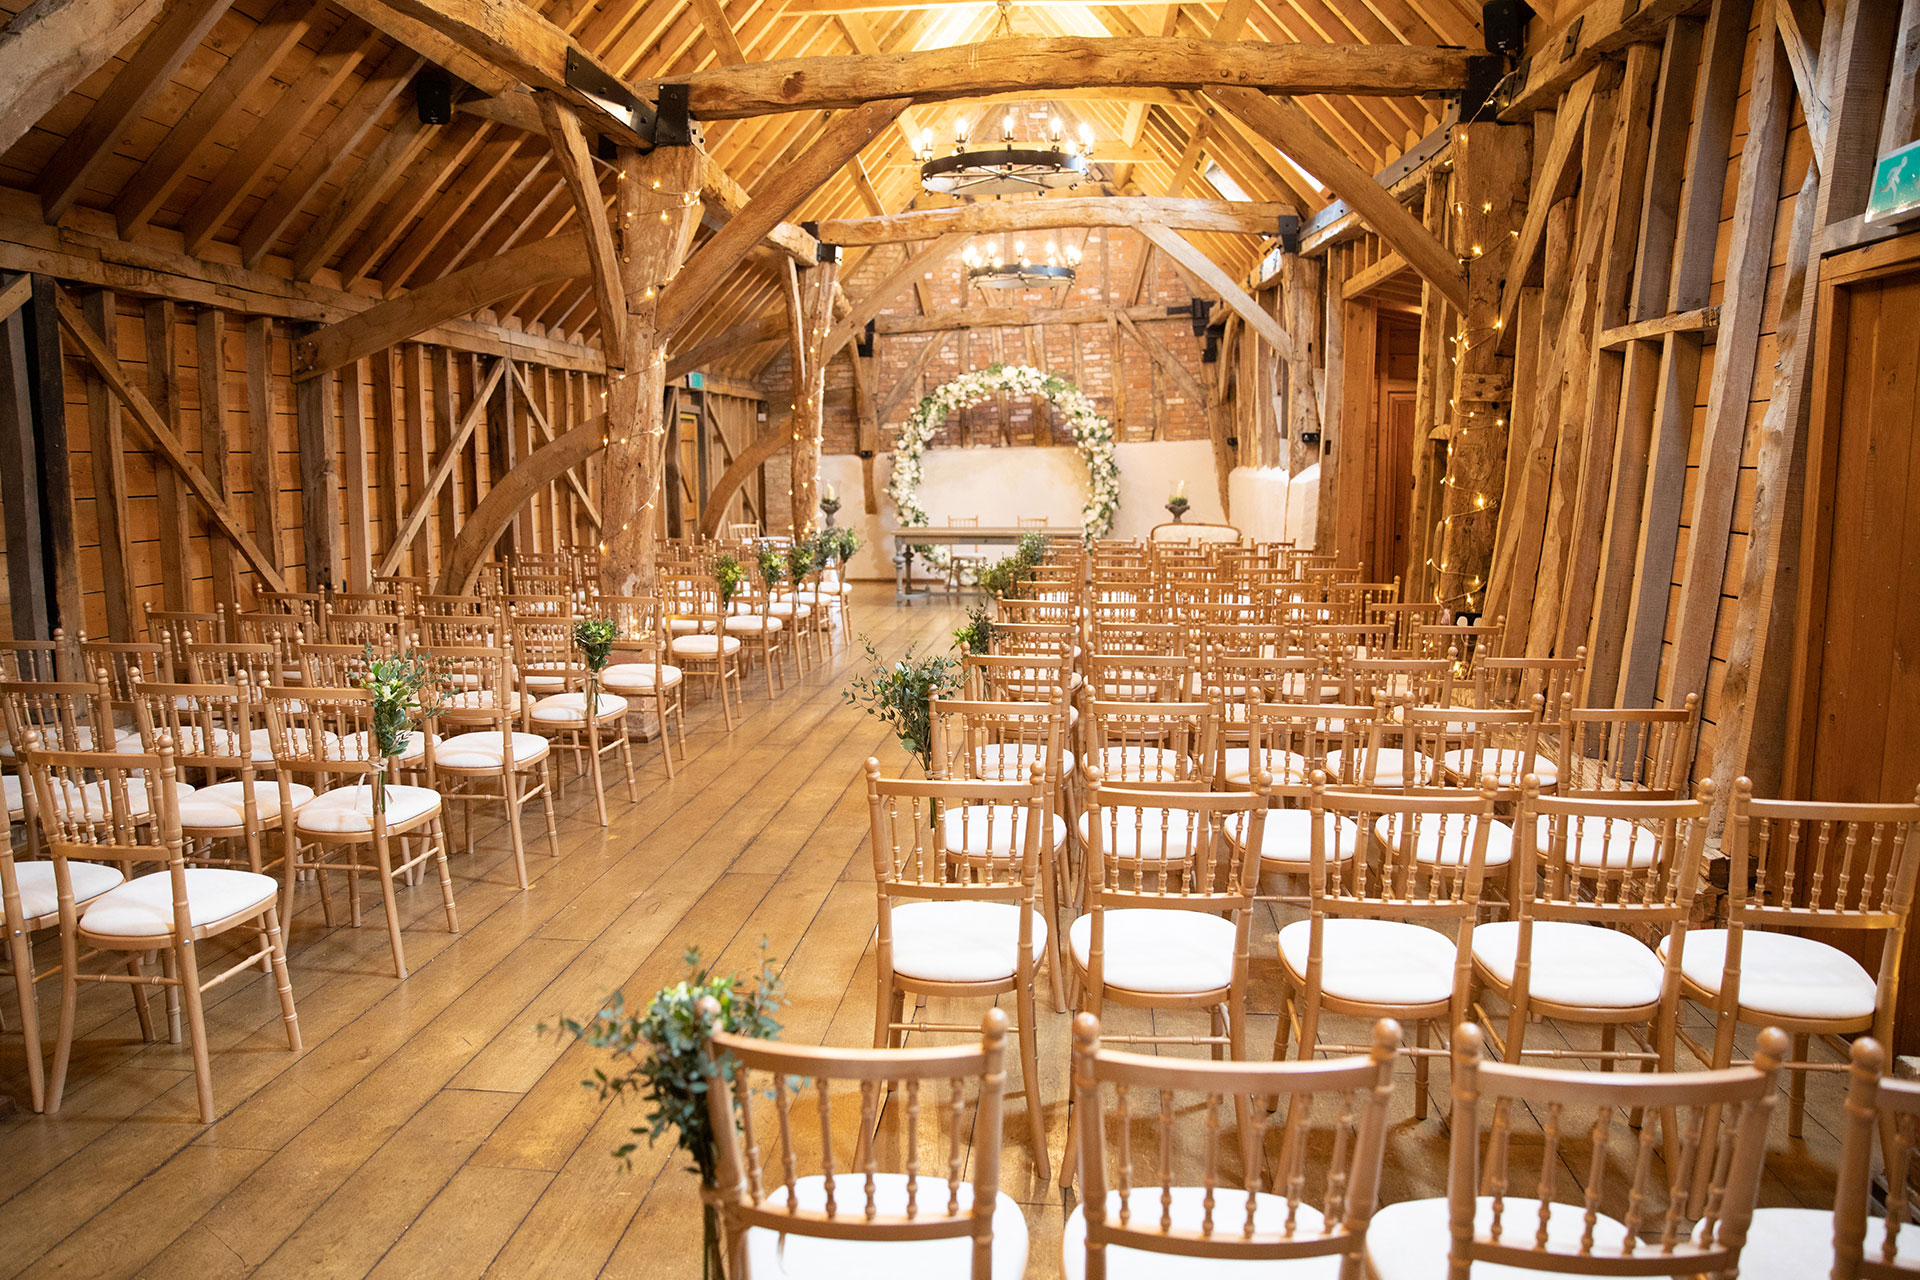 The Rickety Barn at this Cambridgeshire wedding venue is set up for an intimate wedding ceremony